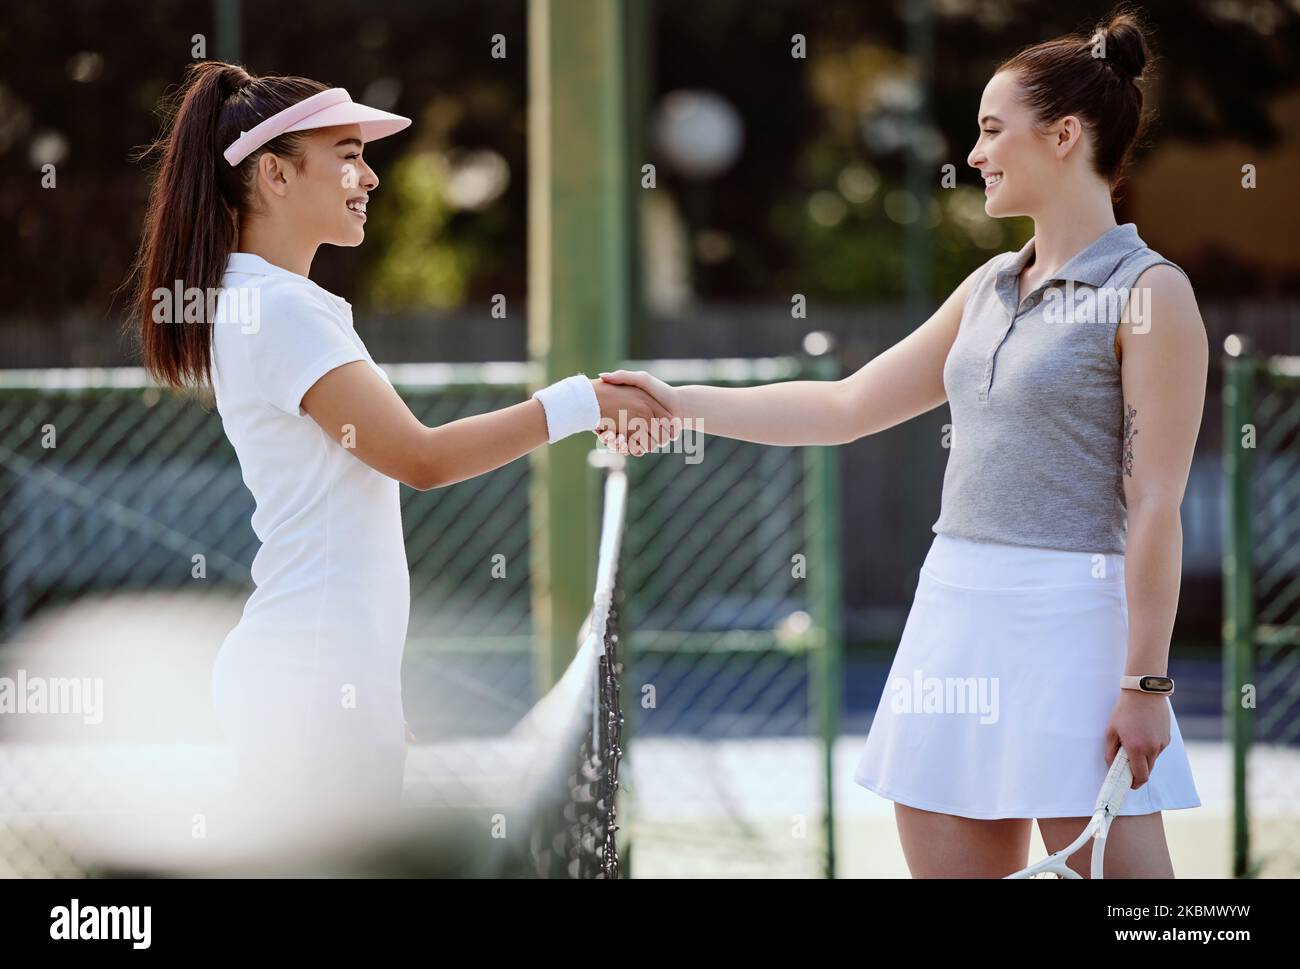 Tennis, sport and women handshake for competition, fitness and exercise on outdoor tennis court for health and active life. Athlete, friendly and Stock Photo